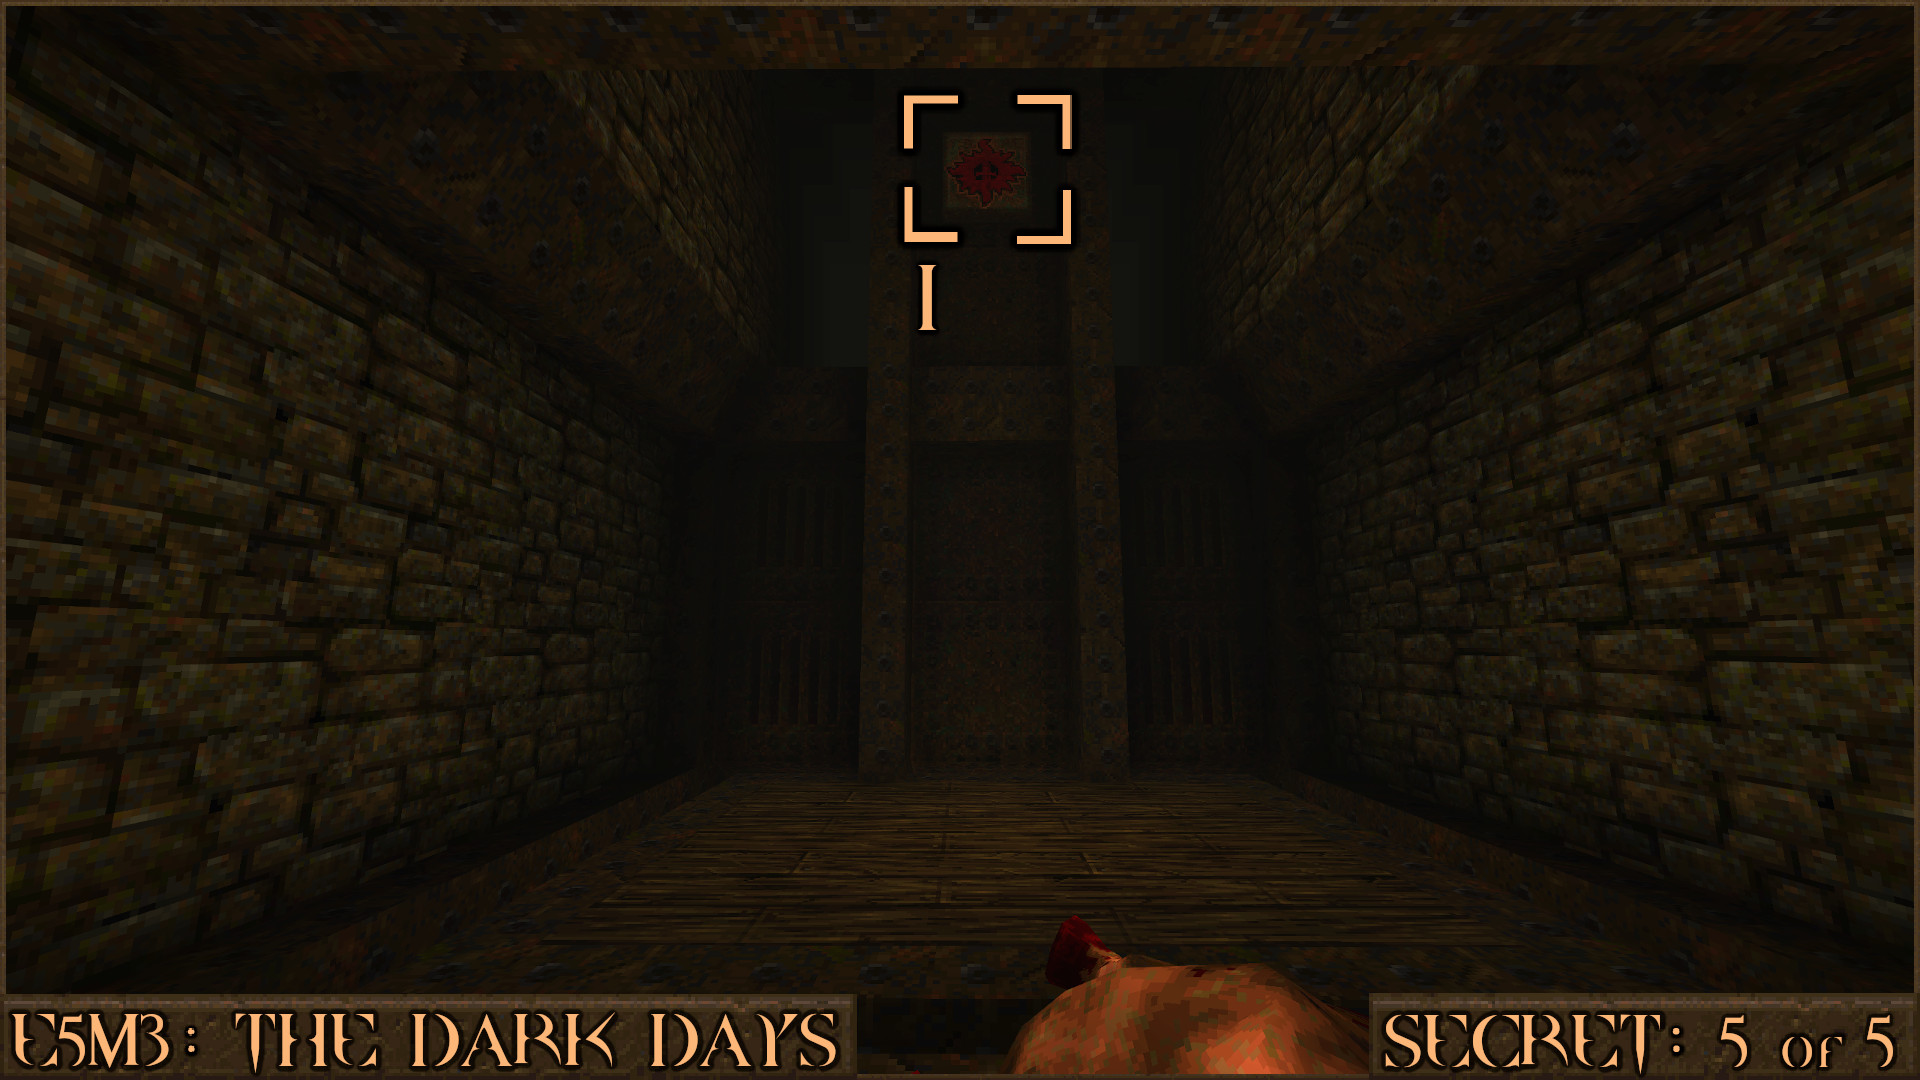 Quake Finding All Secrets in Quake Expansion pack: Dimension of the Past - E5M3: The Dark Days - 8CE65B4